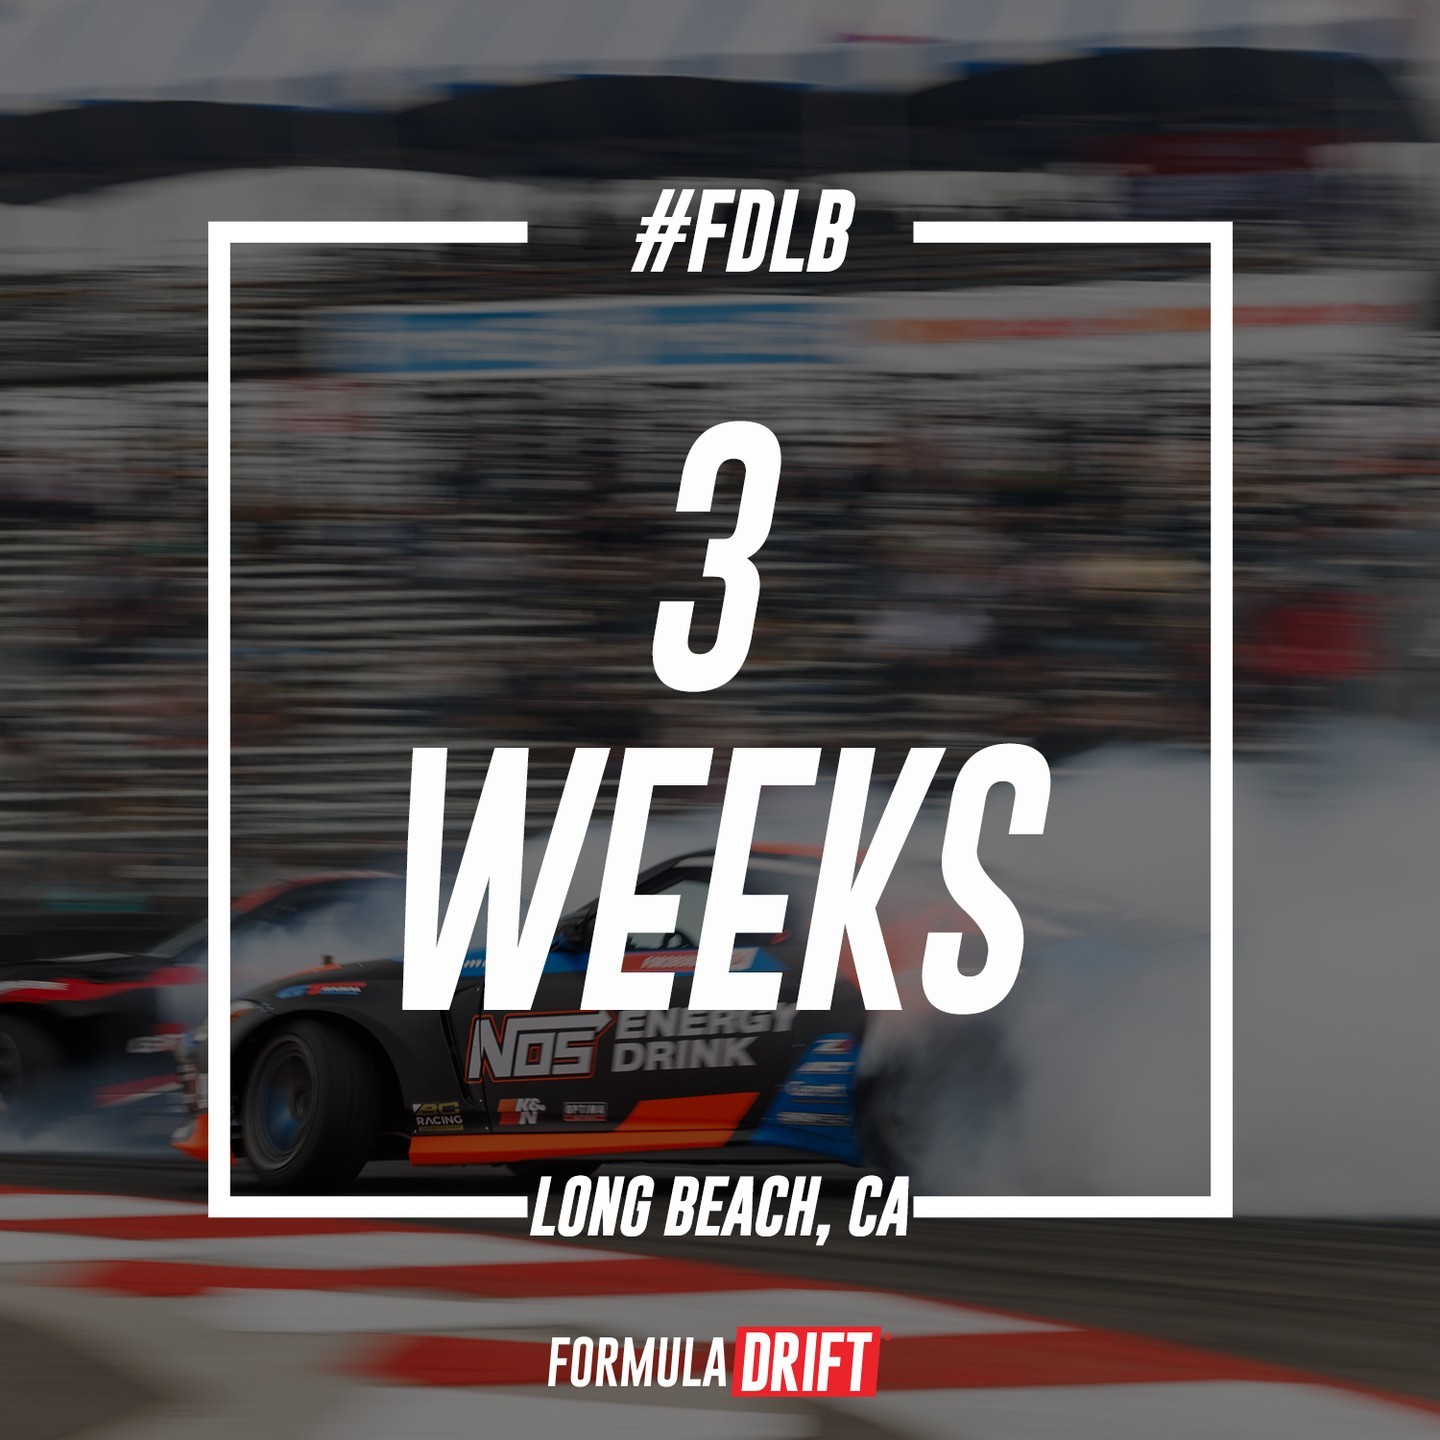 We are just 3 weeks away from an all-new season! 

Get your tickets for Round 1: The @AutoZone Streets of Long Beach Presented by @TypeSAuto on April 7-8: (link in bio)